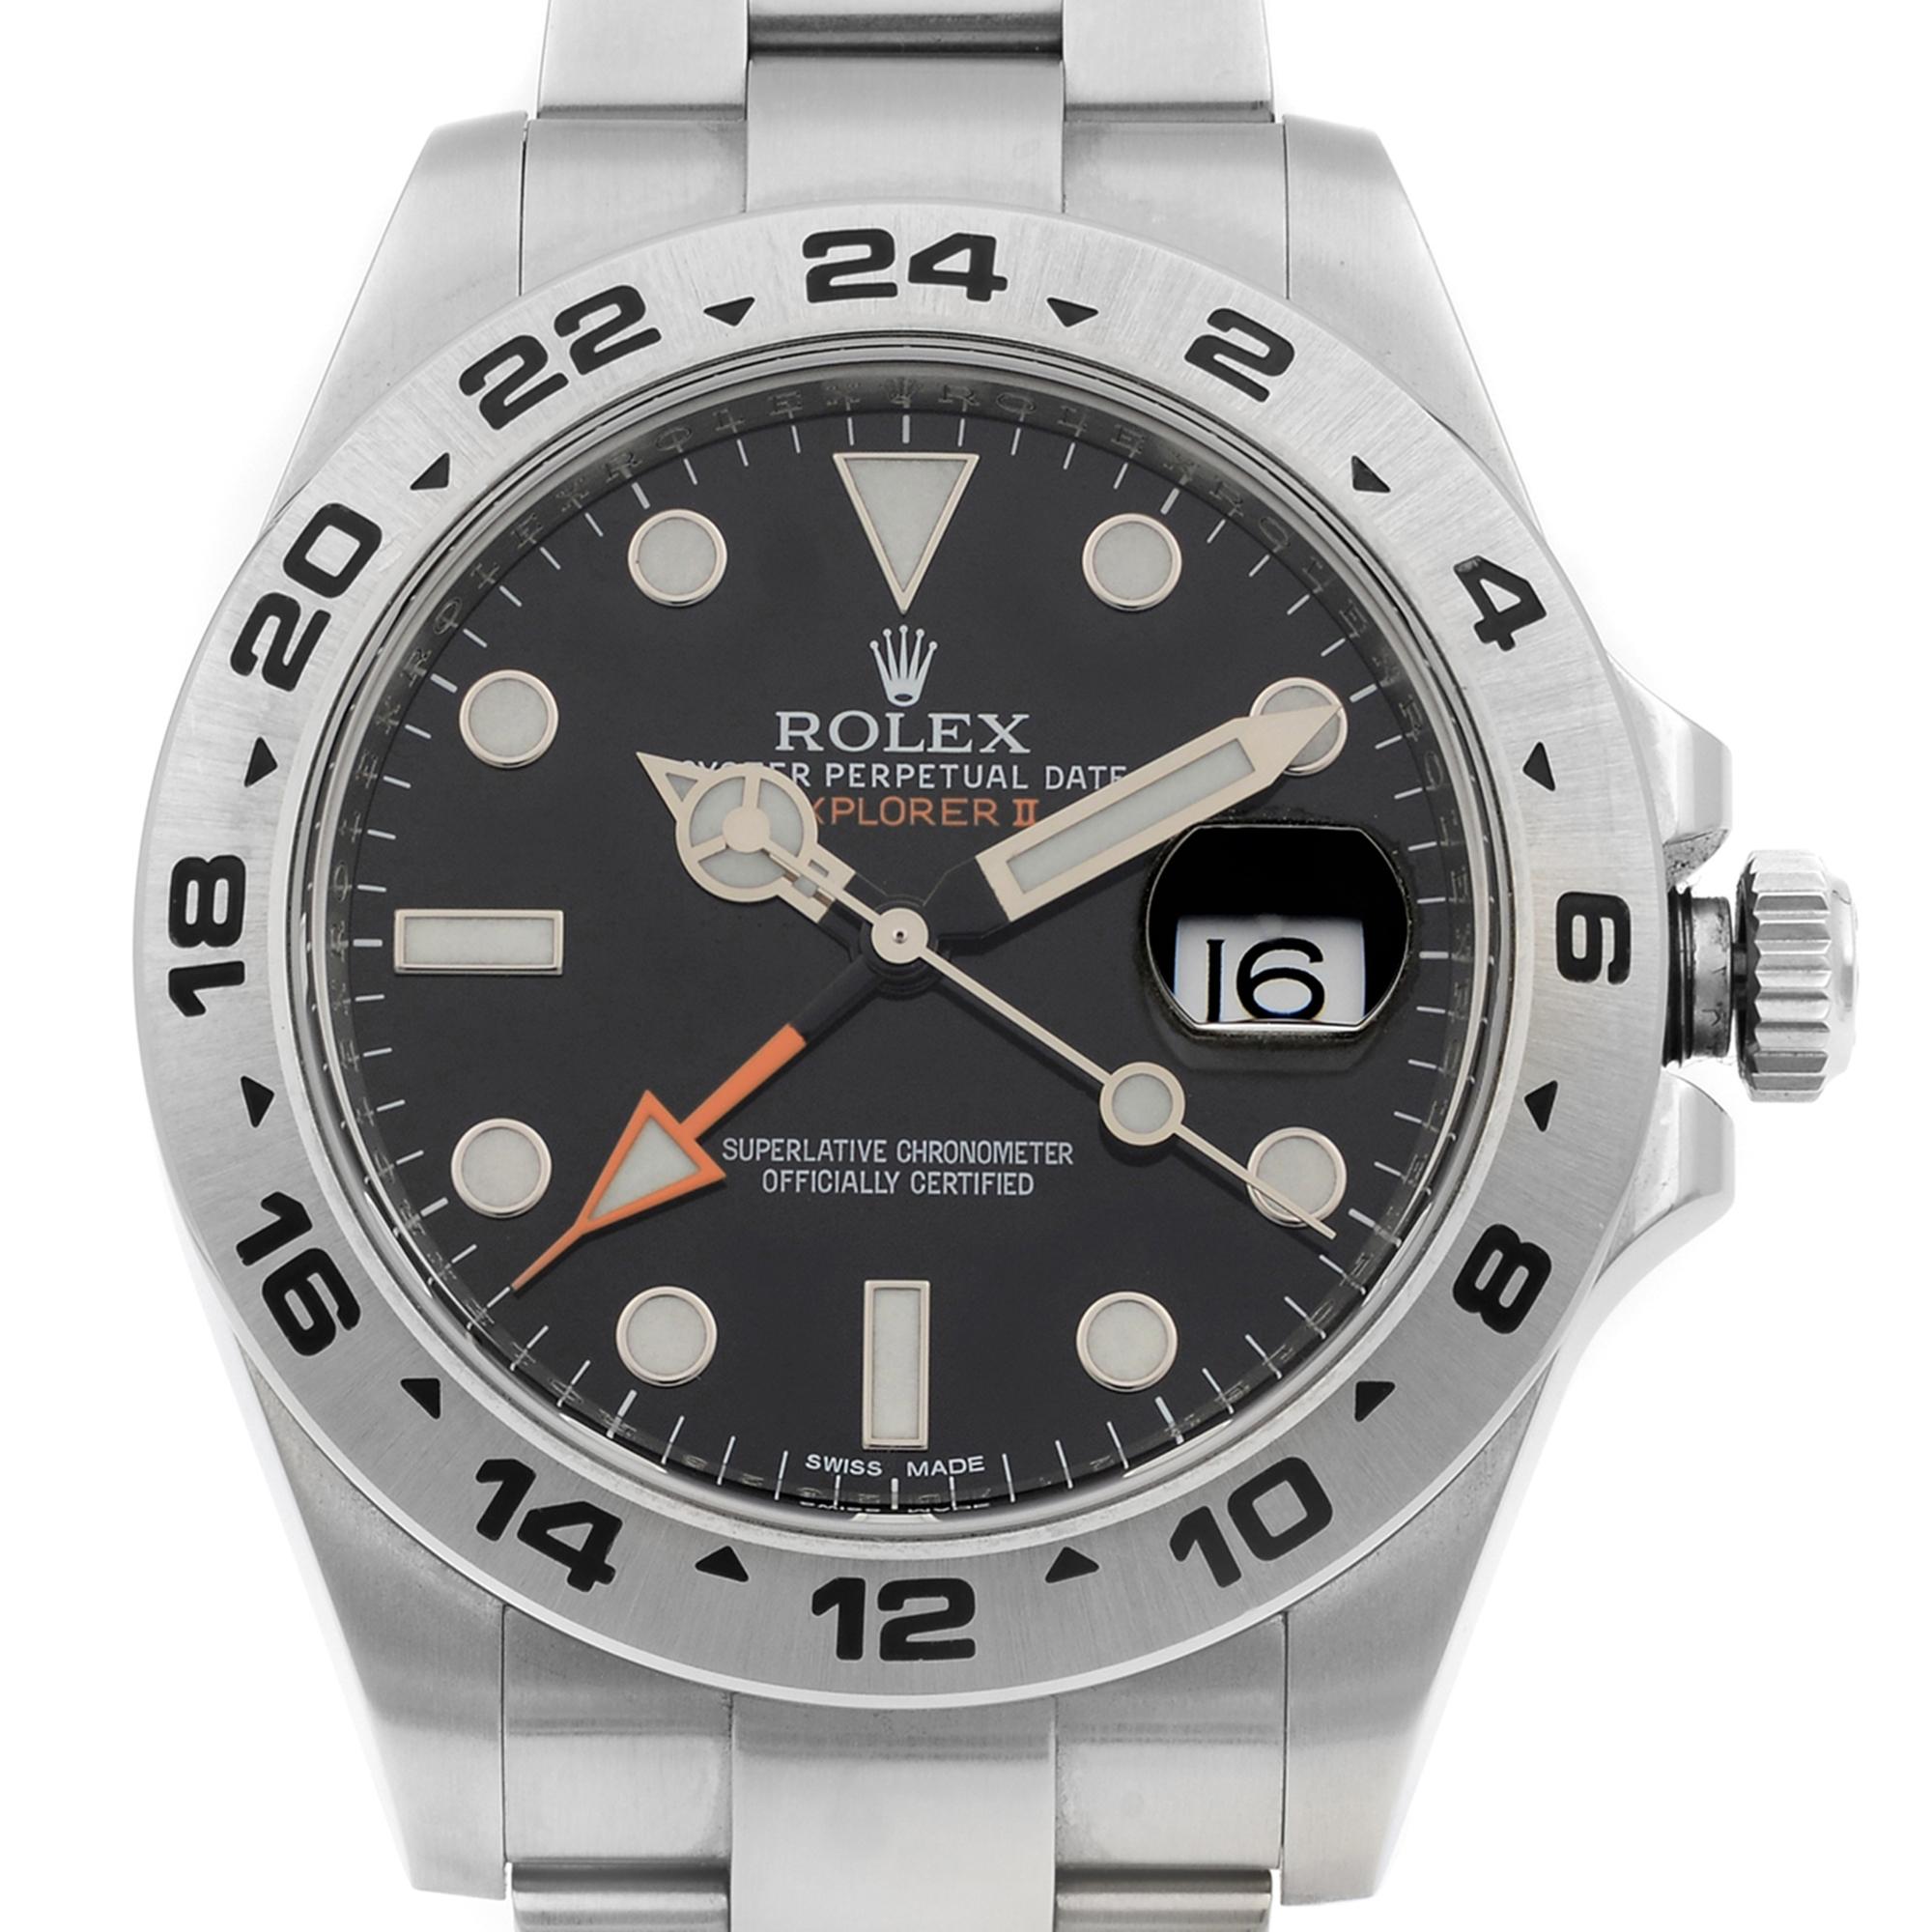 This pre-owned Rolex Explorer II 216570 is a beautiful men's timepiece that is powered by a mechanical (automatic) movement which is cased in a stainless steel case. It has a round shape face, GMT, date indicator dial and has hand sticks & dots